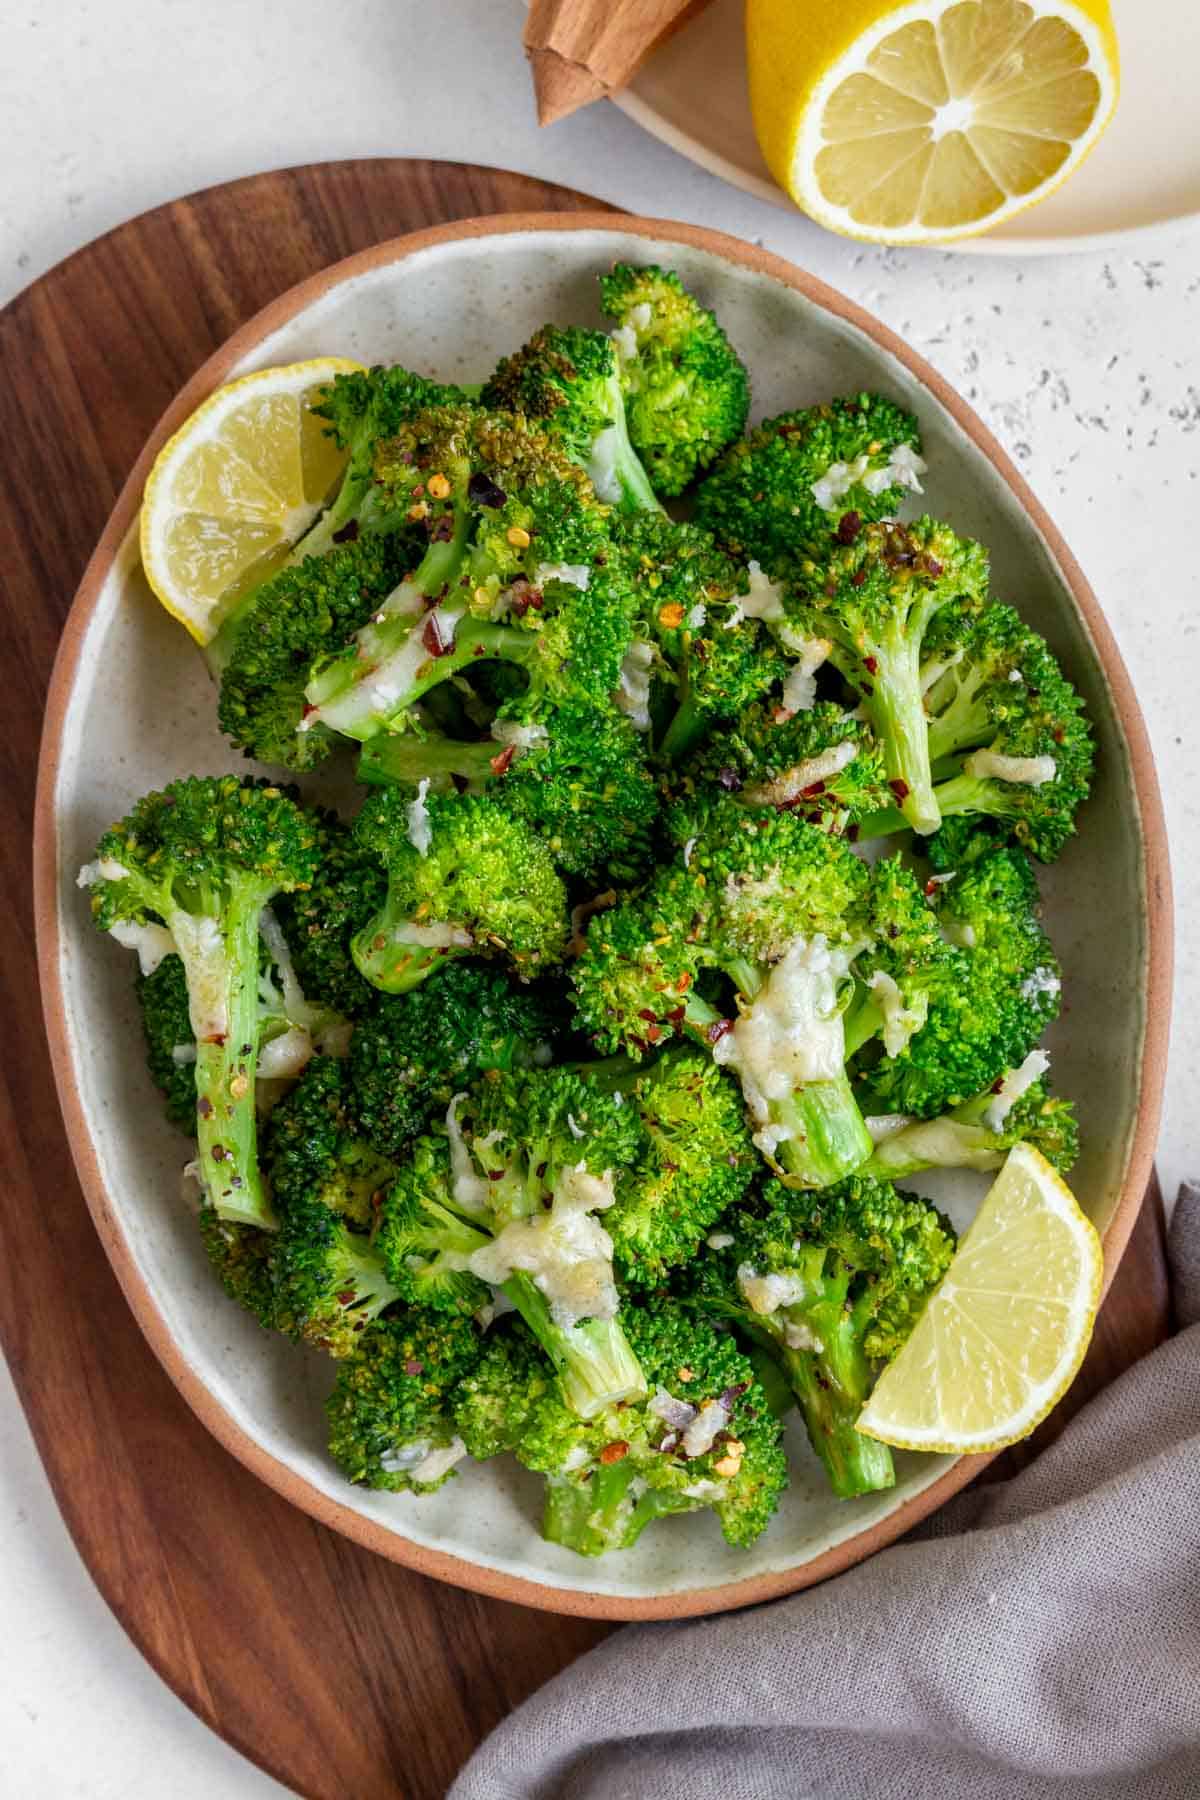 An oval platter of smashed broccoli with red pepper flakes and parmesan on top.